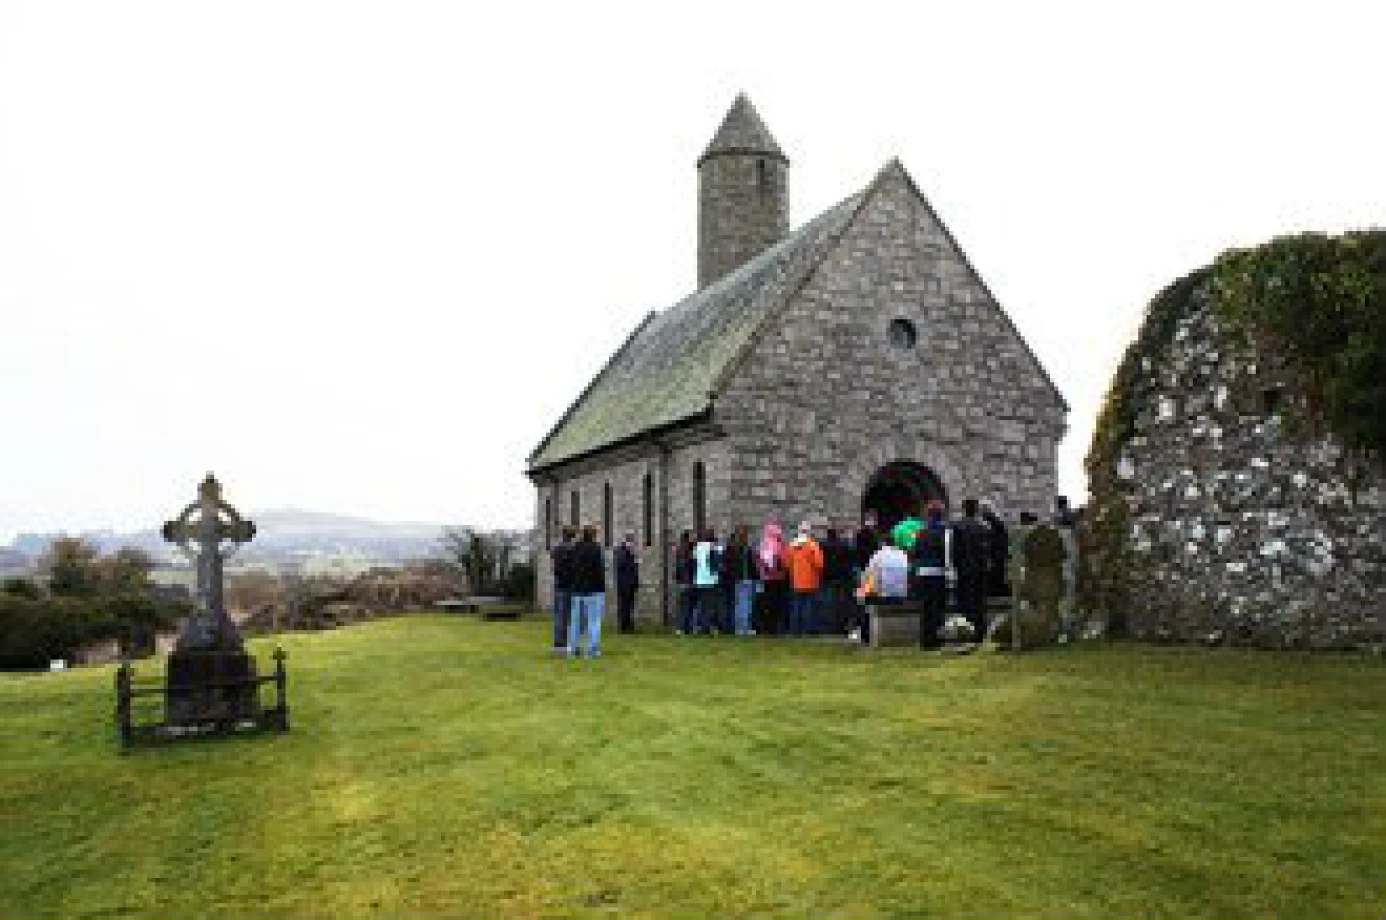 Begin St Patrick’s Day at The Cradle of Christianity in Ireland